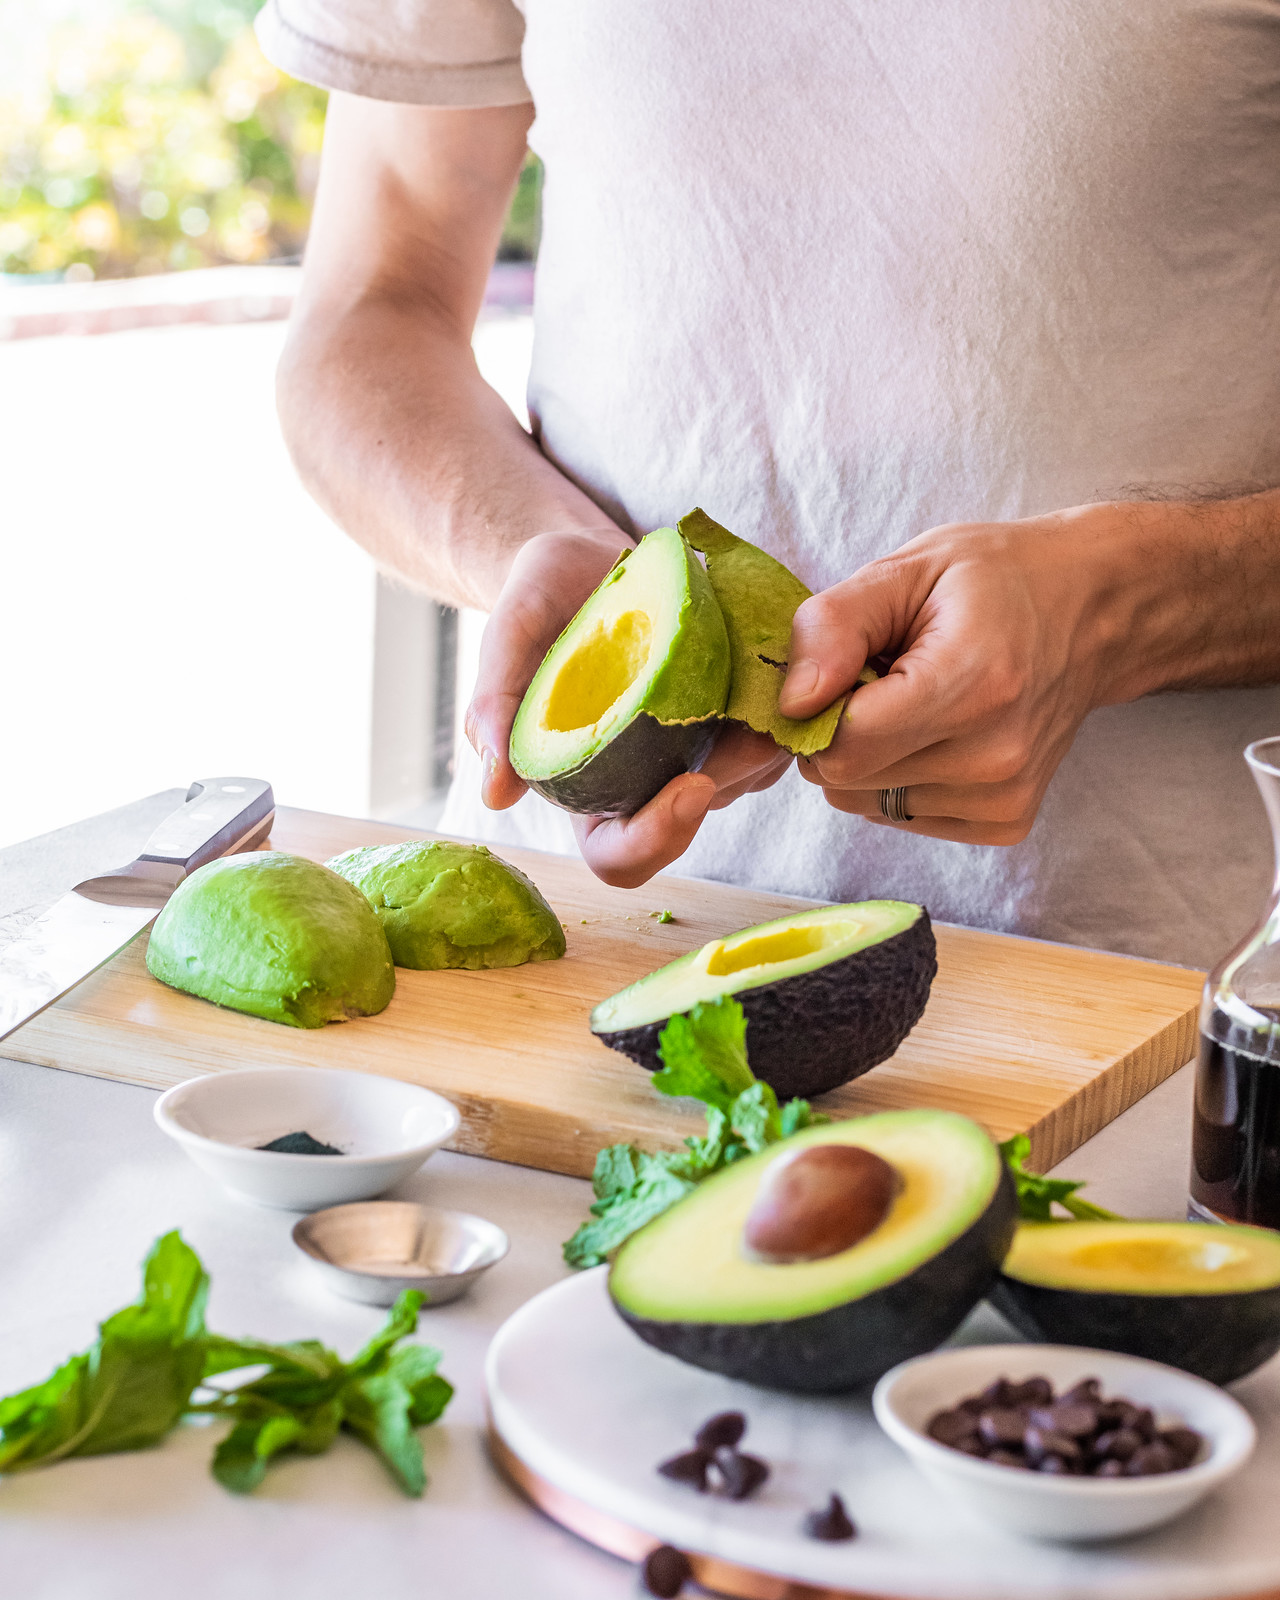 if the avocados don't peel easily, they can also be scooped out with a spoon